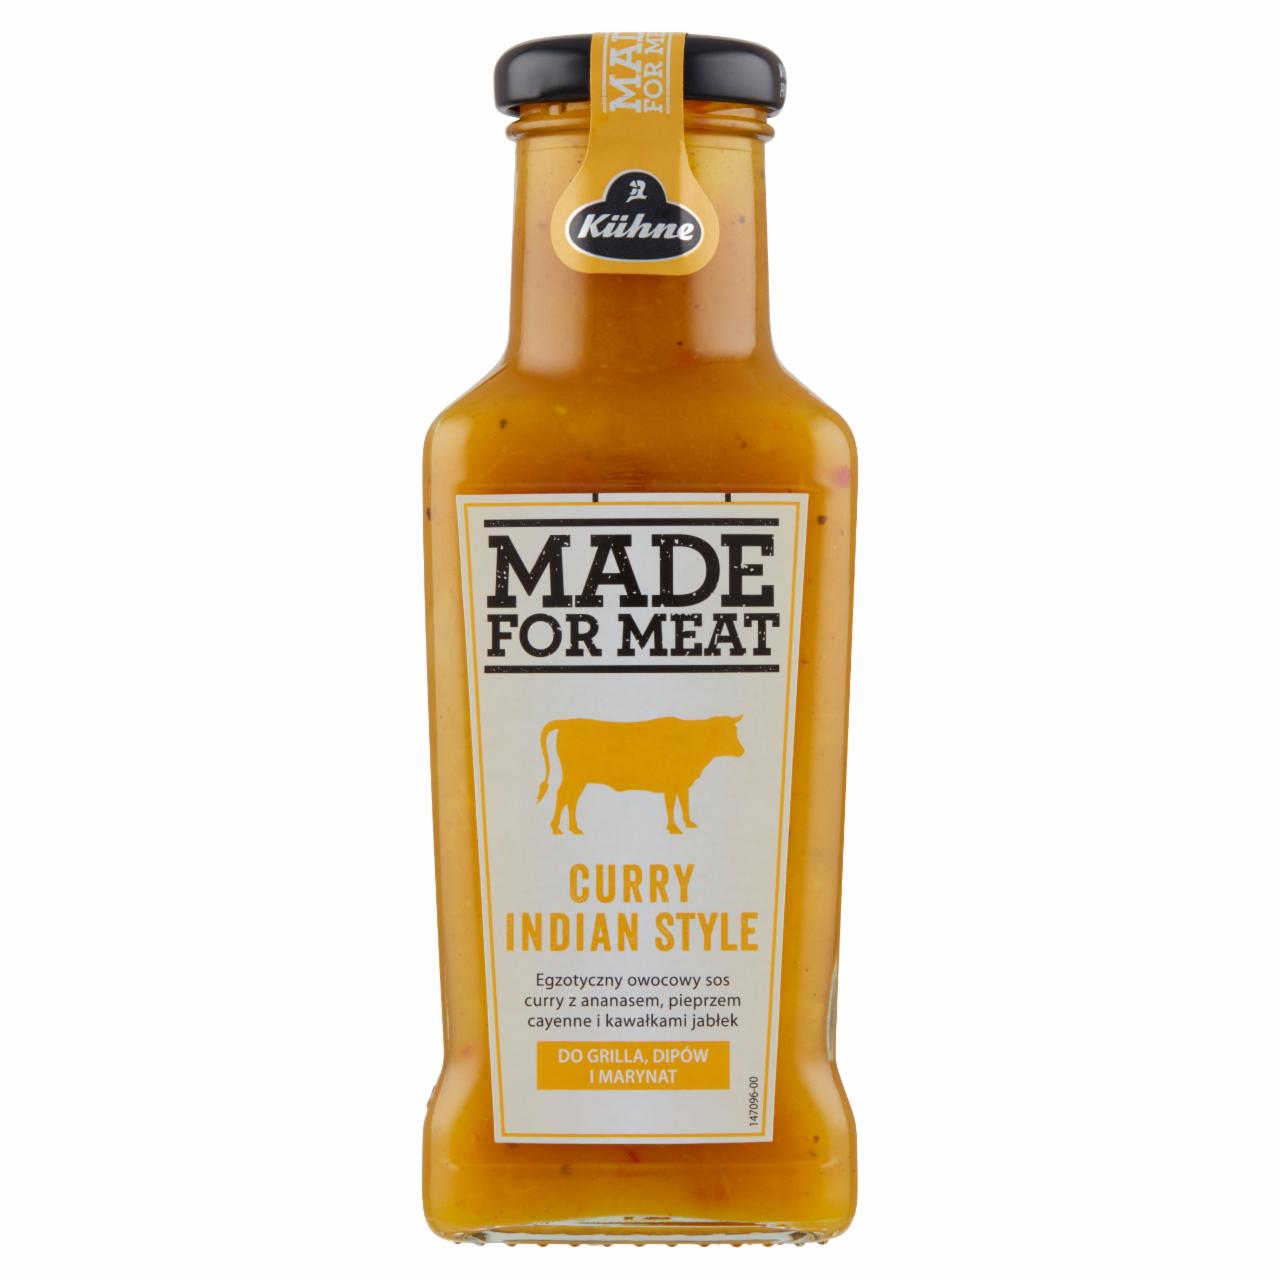 Zdjęcia - Kühne Made For Meat Curry Indian Style Sos 235 ml